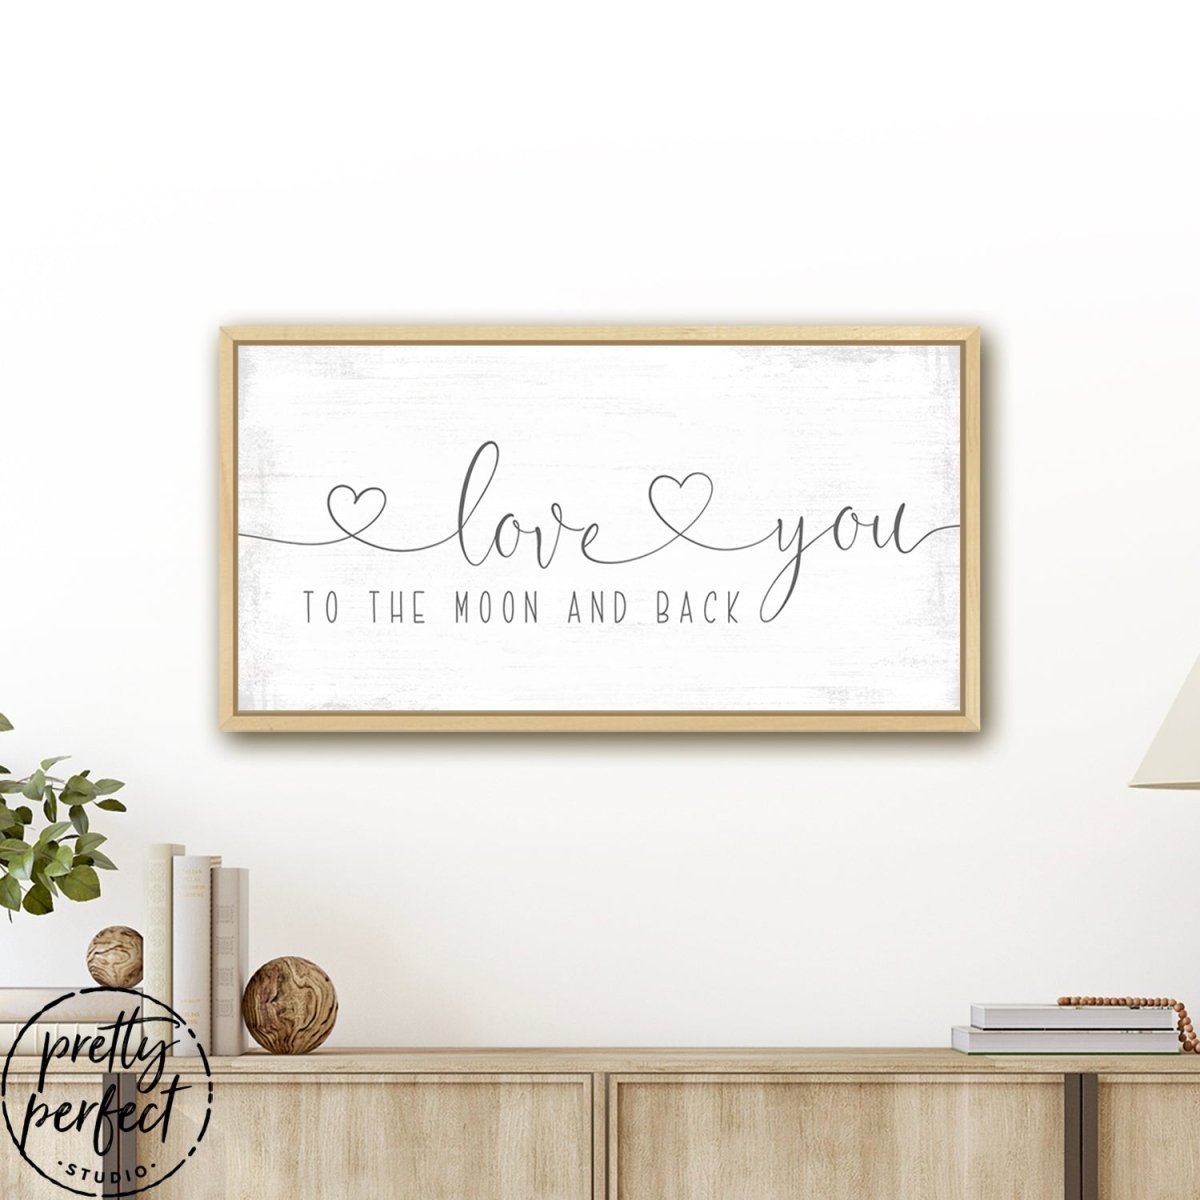 Love You to the Moon and Back Sign With Hearts Above Table - Pretty Perfect Studio